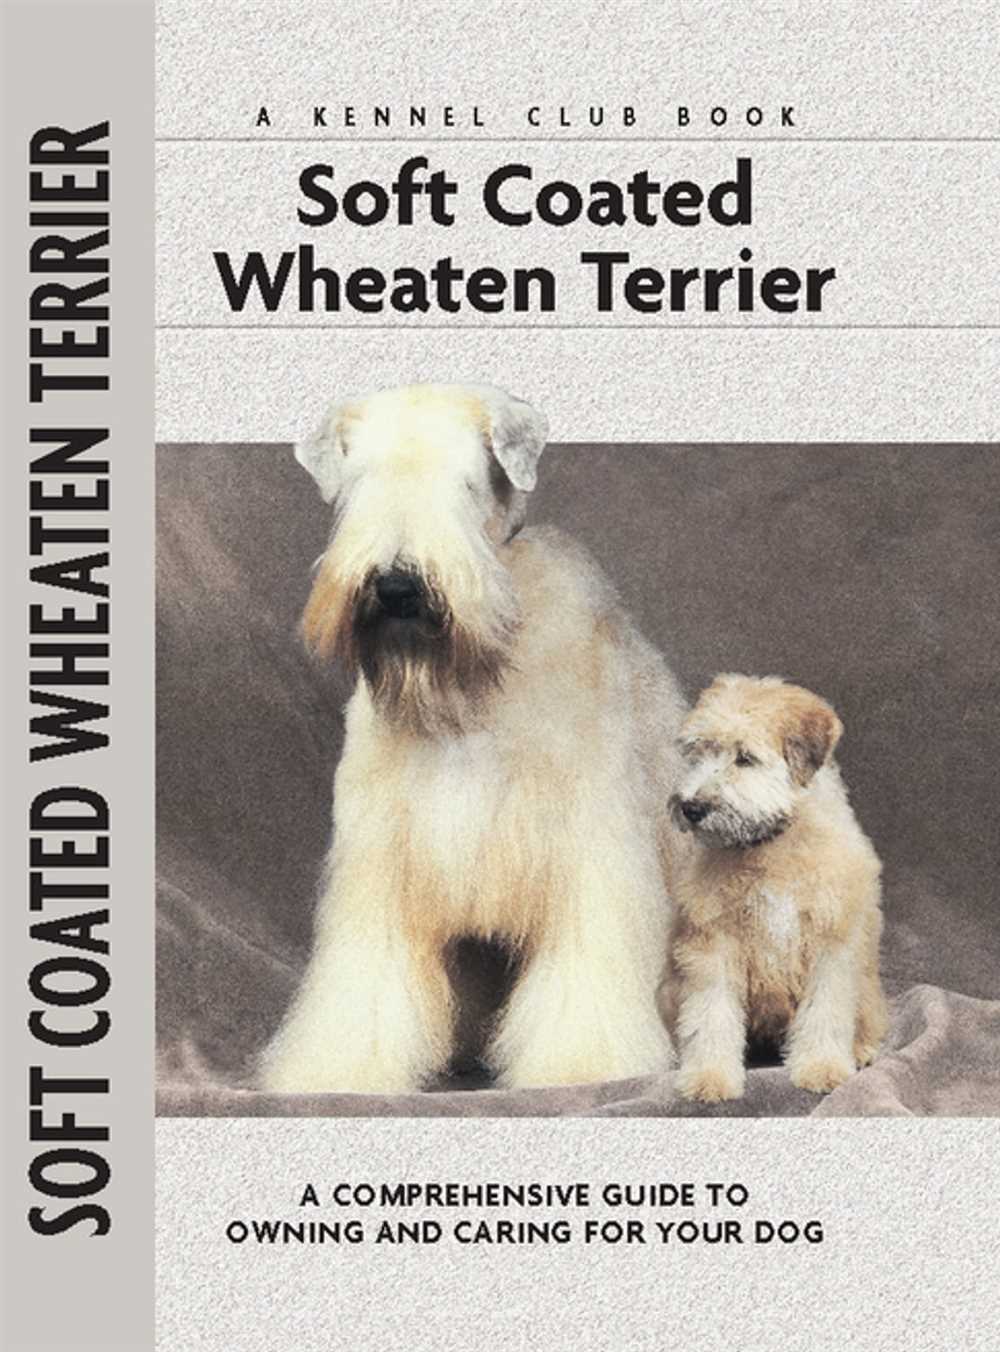 Grooming Your Soft Coated Wheaten Terrier: Expert Advice